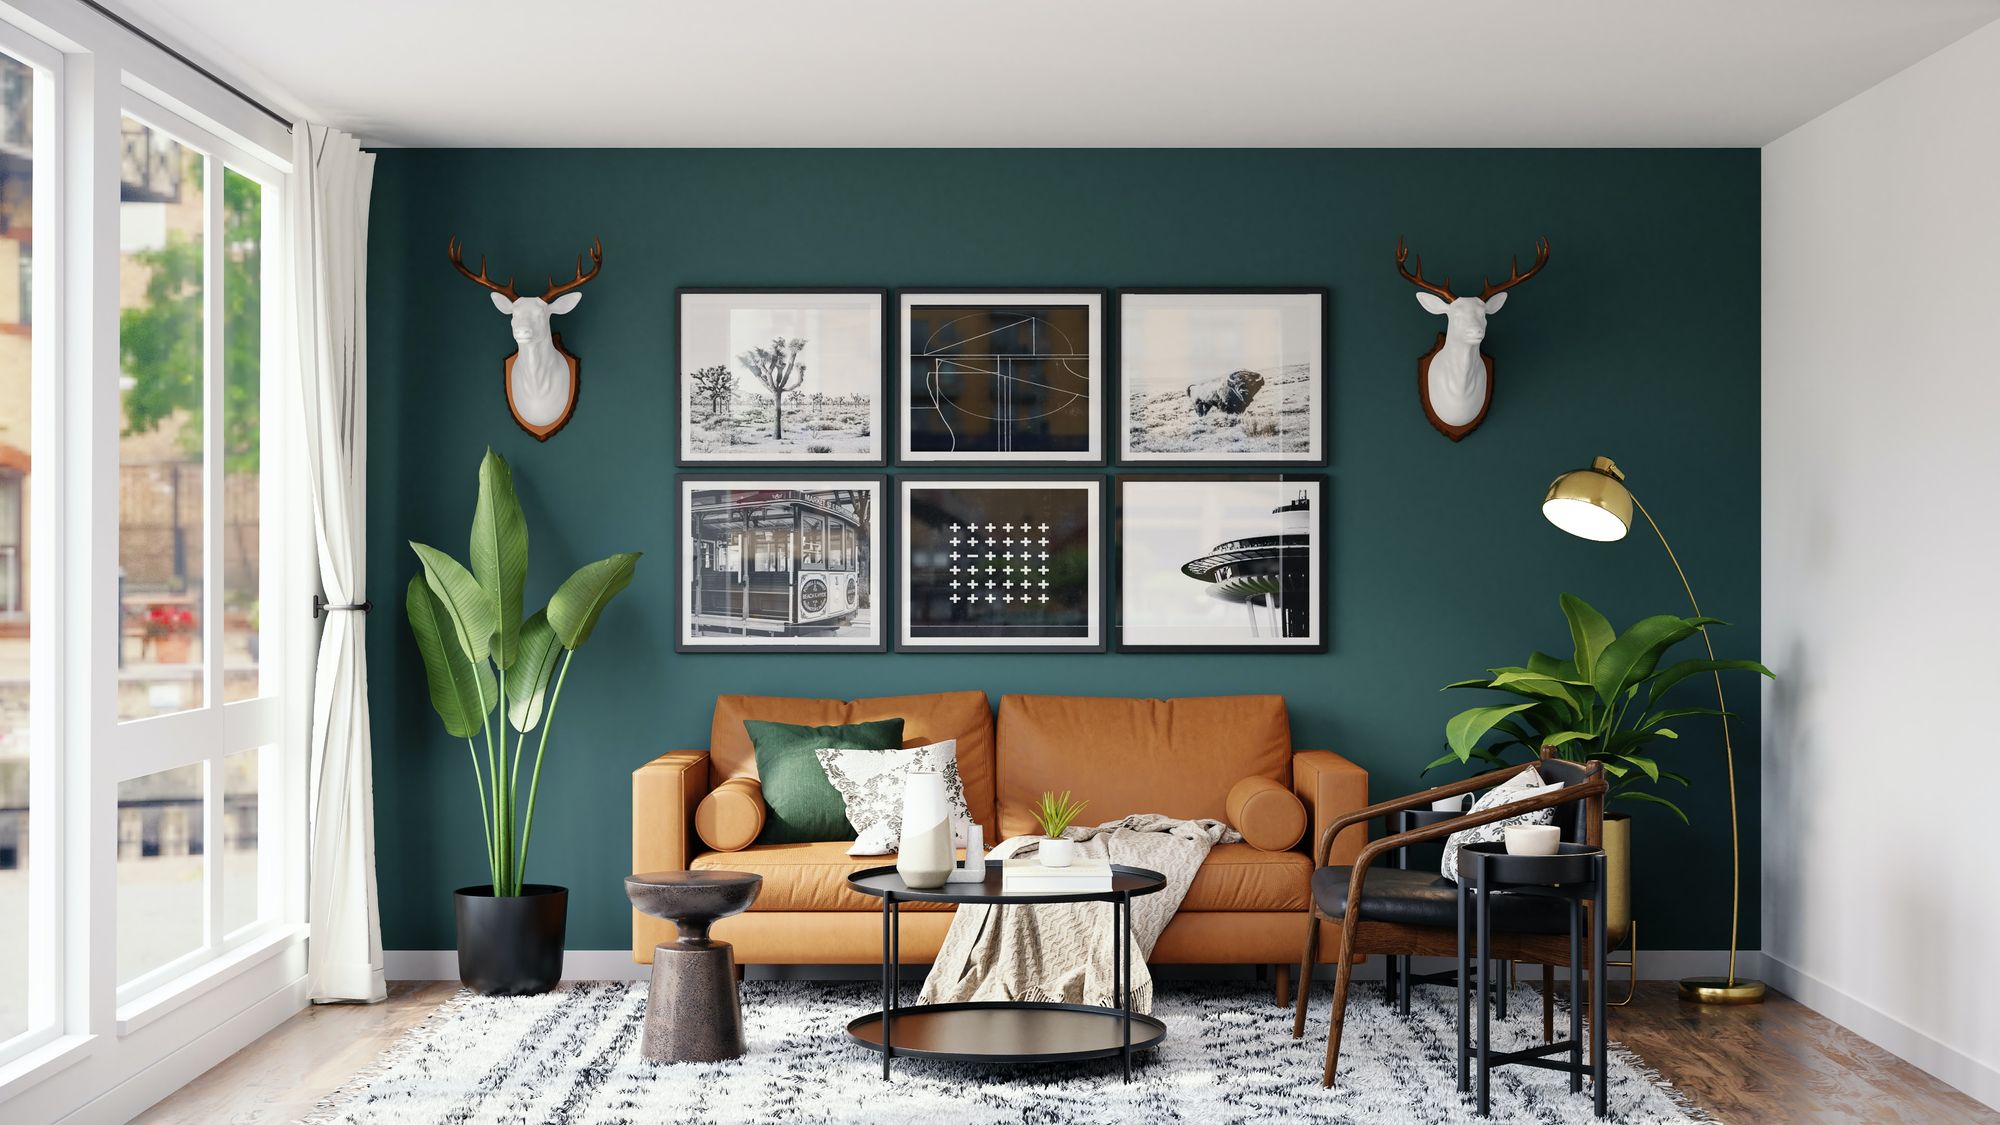 8 tips to help you choose wall art for your spaces